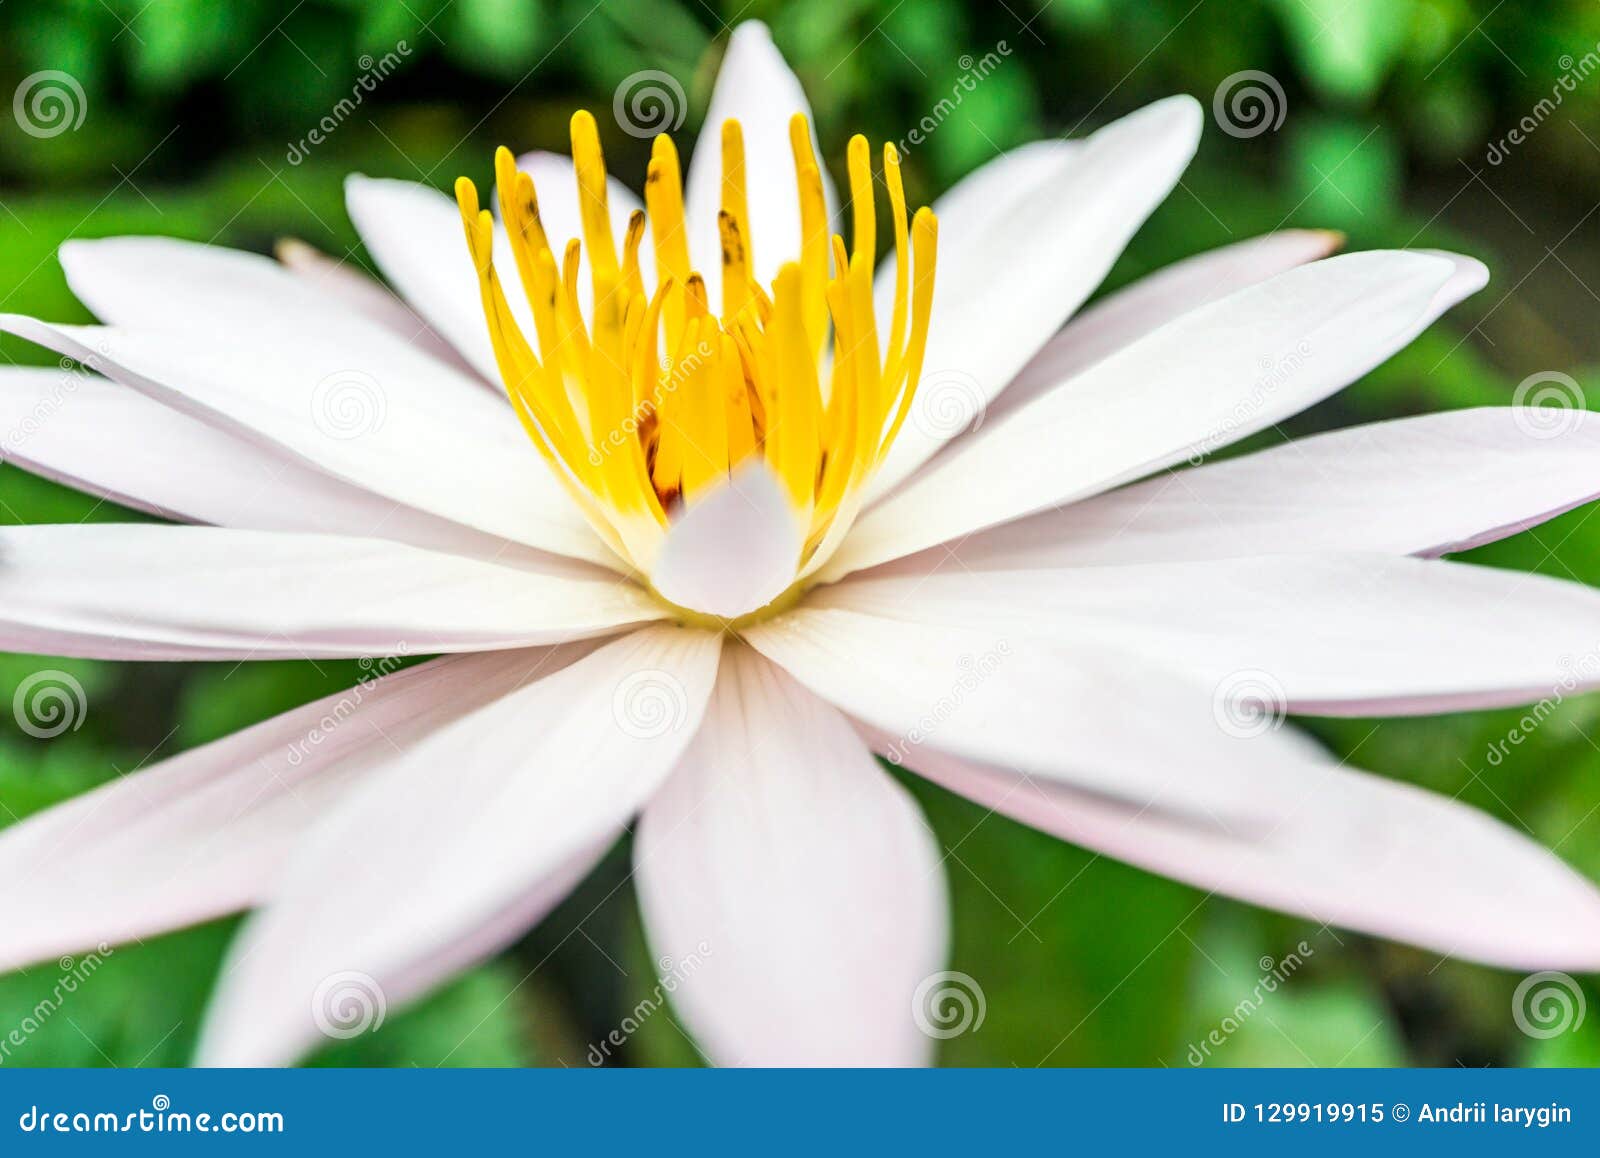 Water Lily Lotus Lily Buddhism Stock Image - Image of lily, botany ...